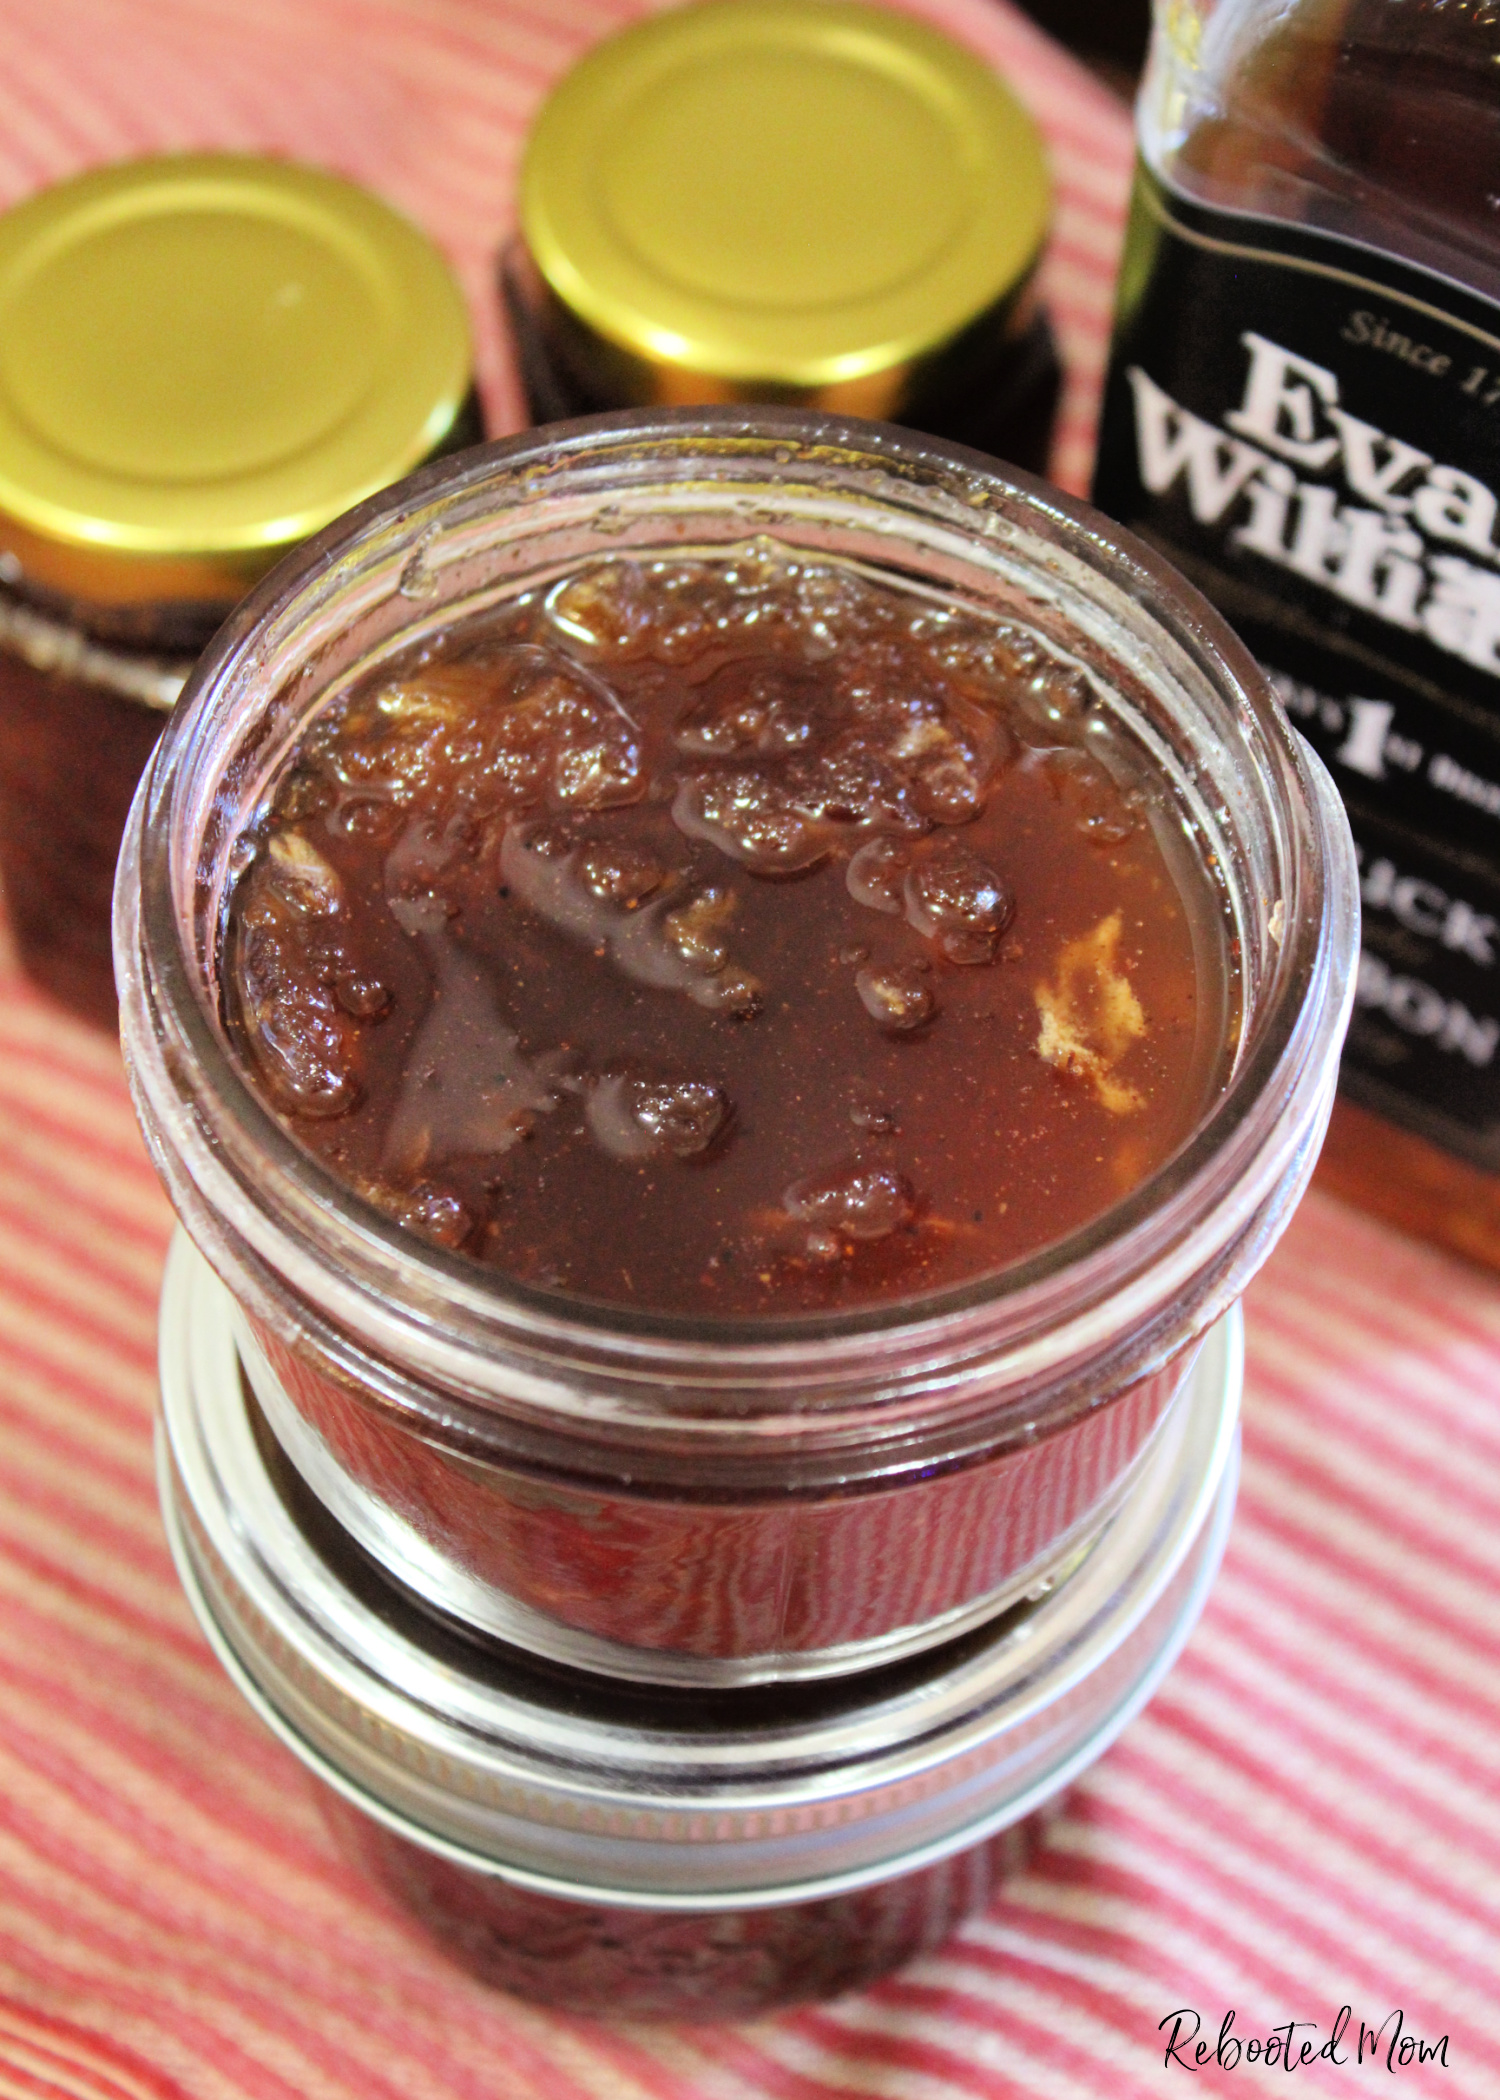 Bourbon Apple Jam combines the delicious taste of apples with the deep flavors of bourbon for a jam that's a twist on traditional varieties! Perfect to serve up next to a cheeseboard or toasted sourdough.